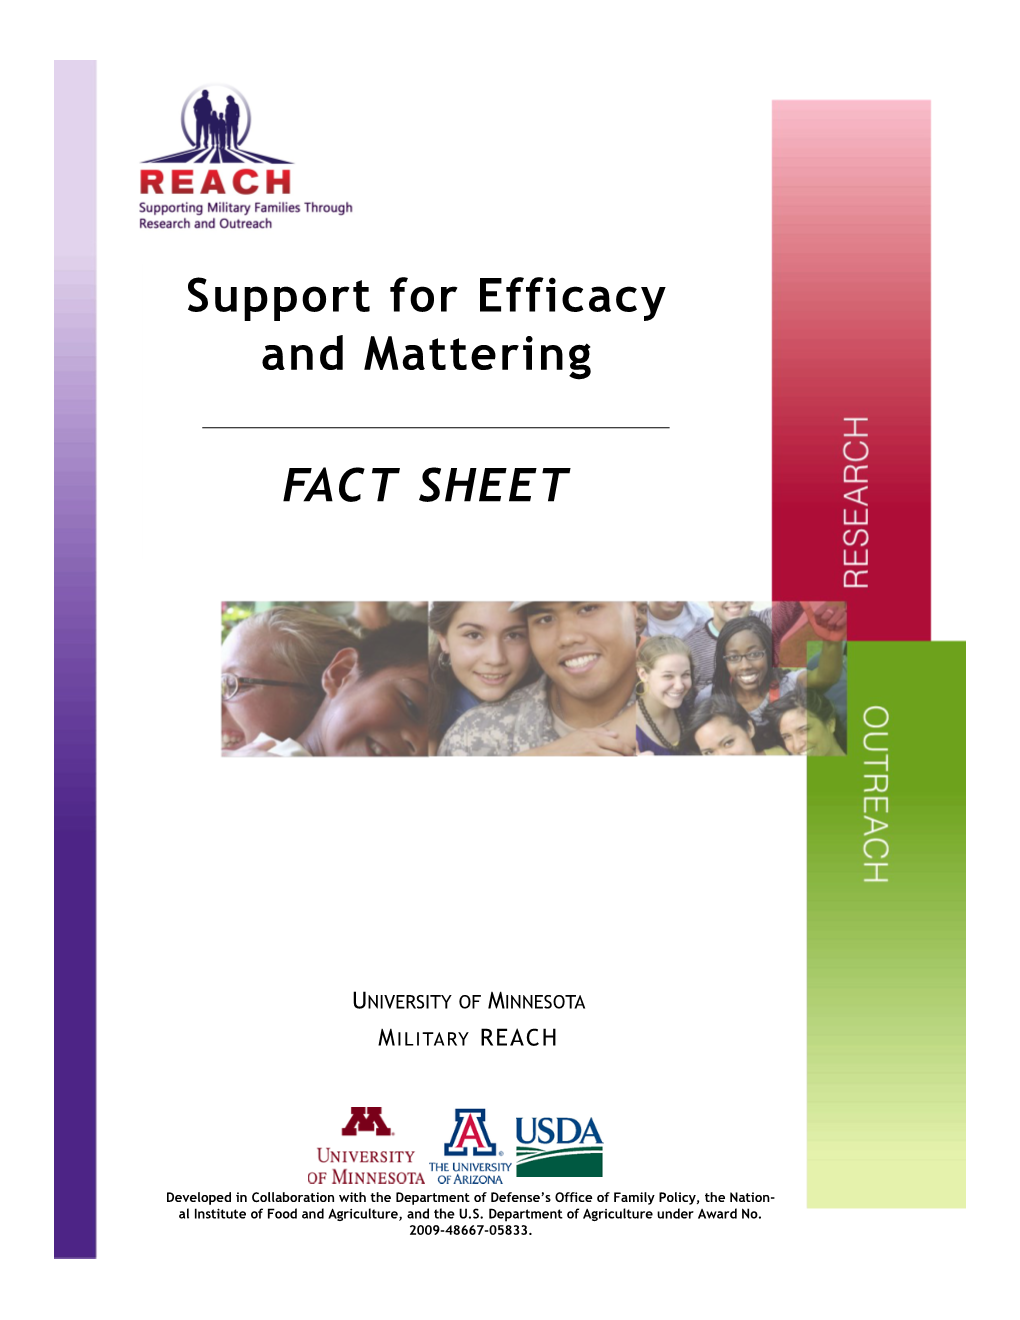 Support for Efficacy and Mattering FACT SHEET